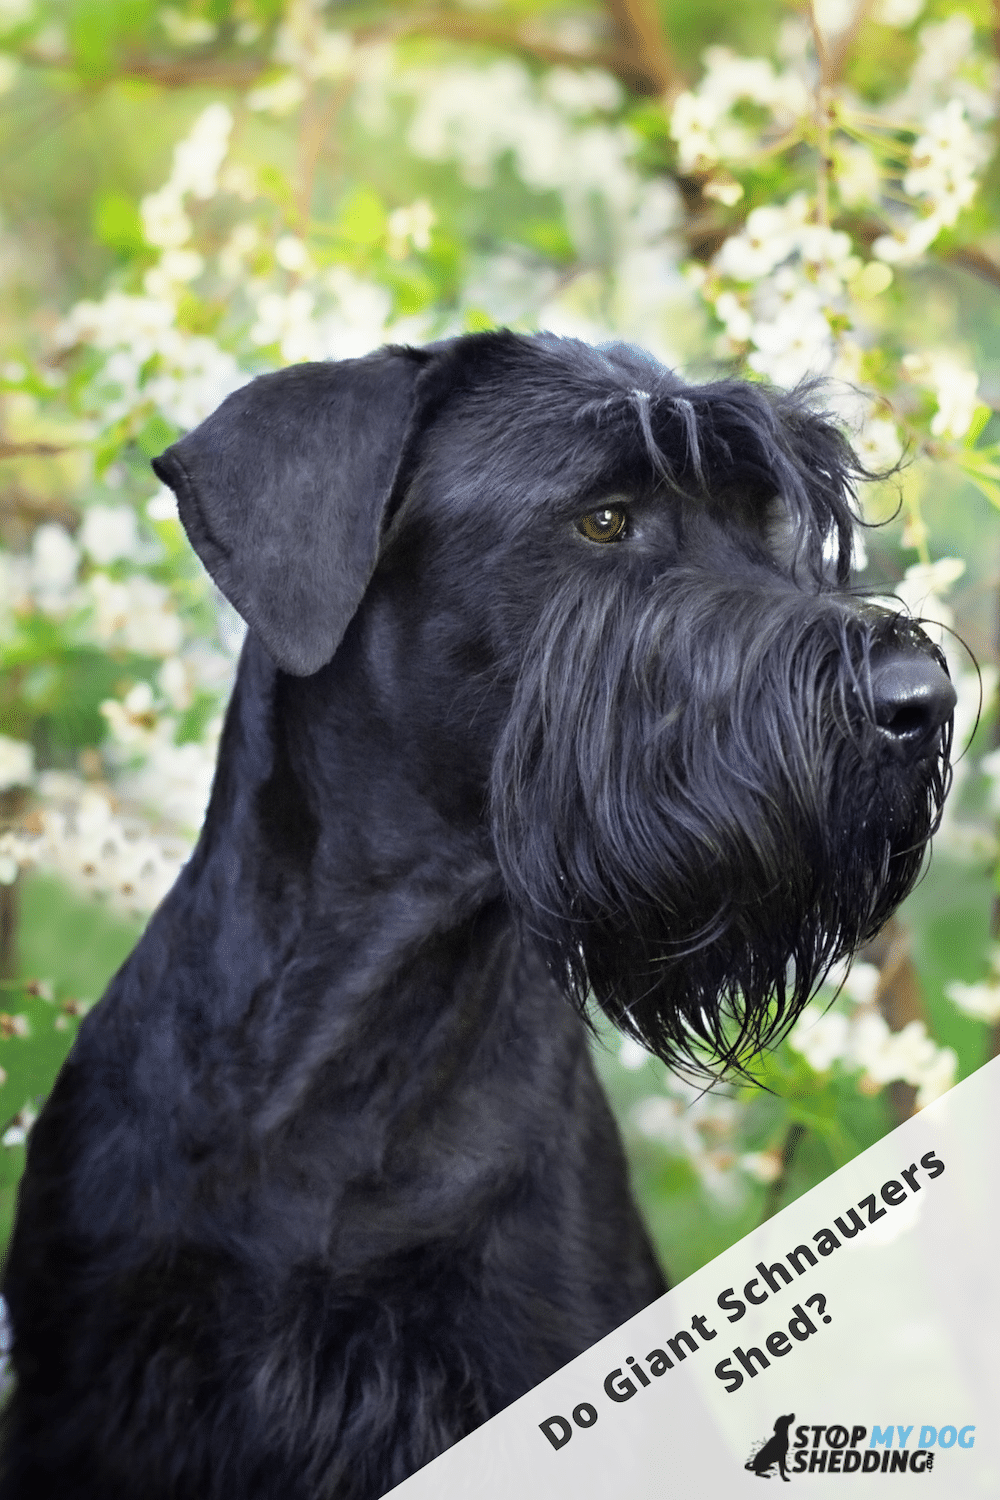 Do Giant Schnauzers Shed Much?